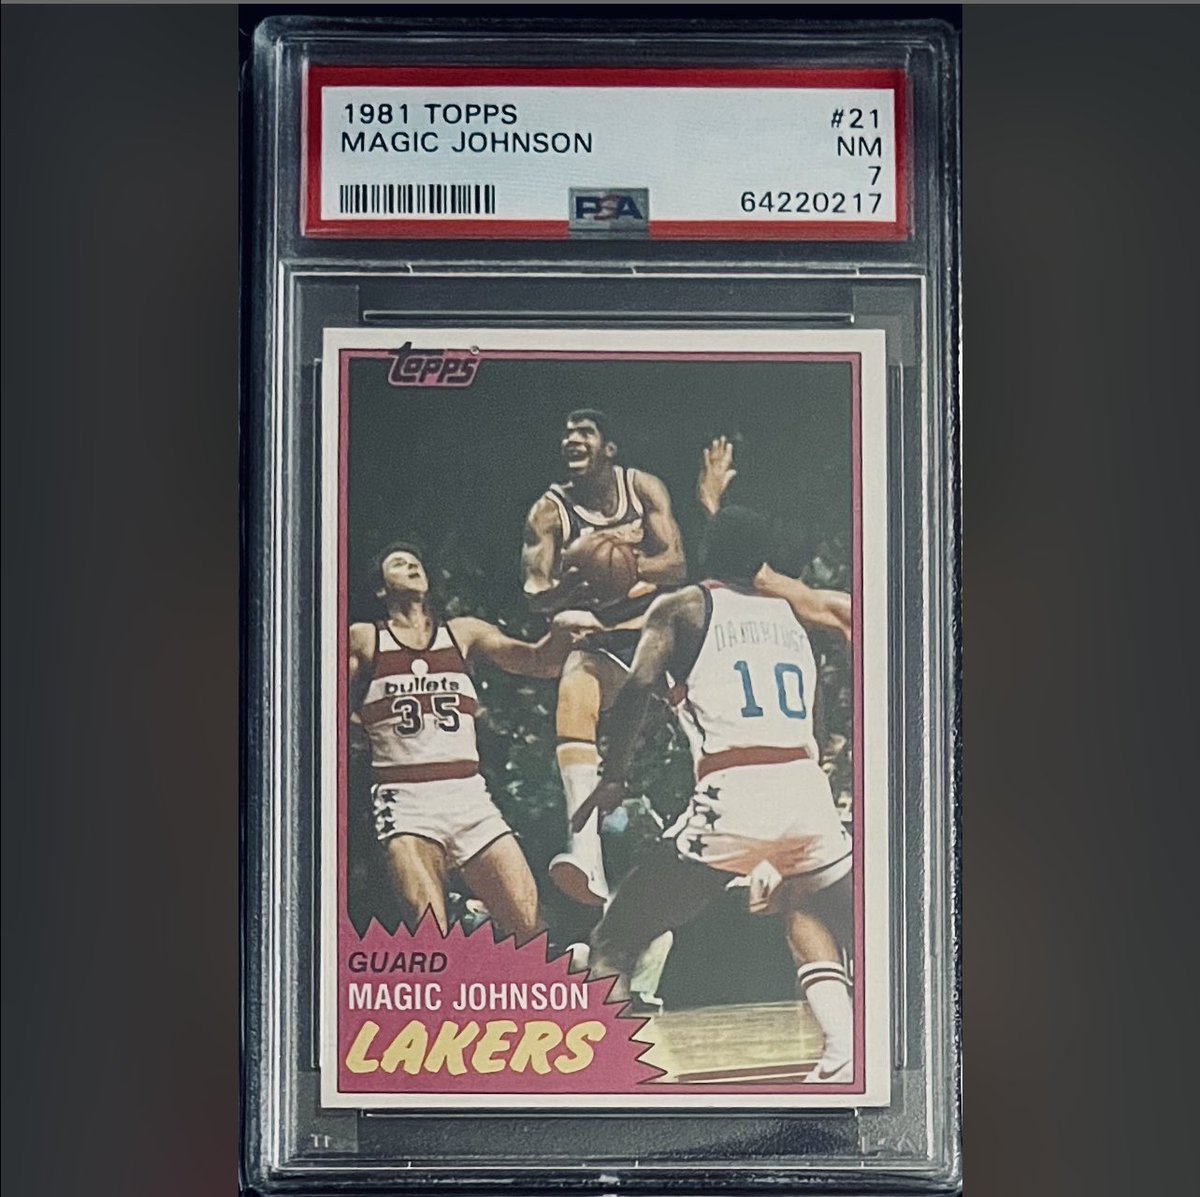 Happy to have this one back from PSA - grade was consistent with our evaluation - first year Magic was on a card by himself…@CardPurchaser 

#mailday #thehobby #sportscards #whodoyoucollect #magic #basketball #Topps #gradereveal